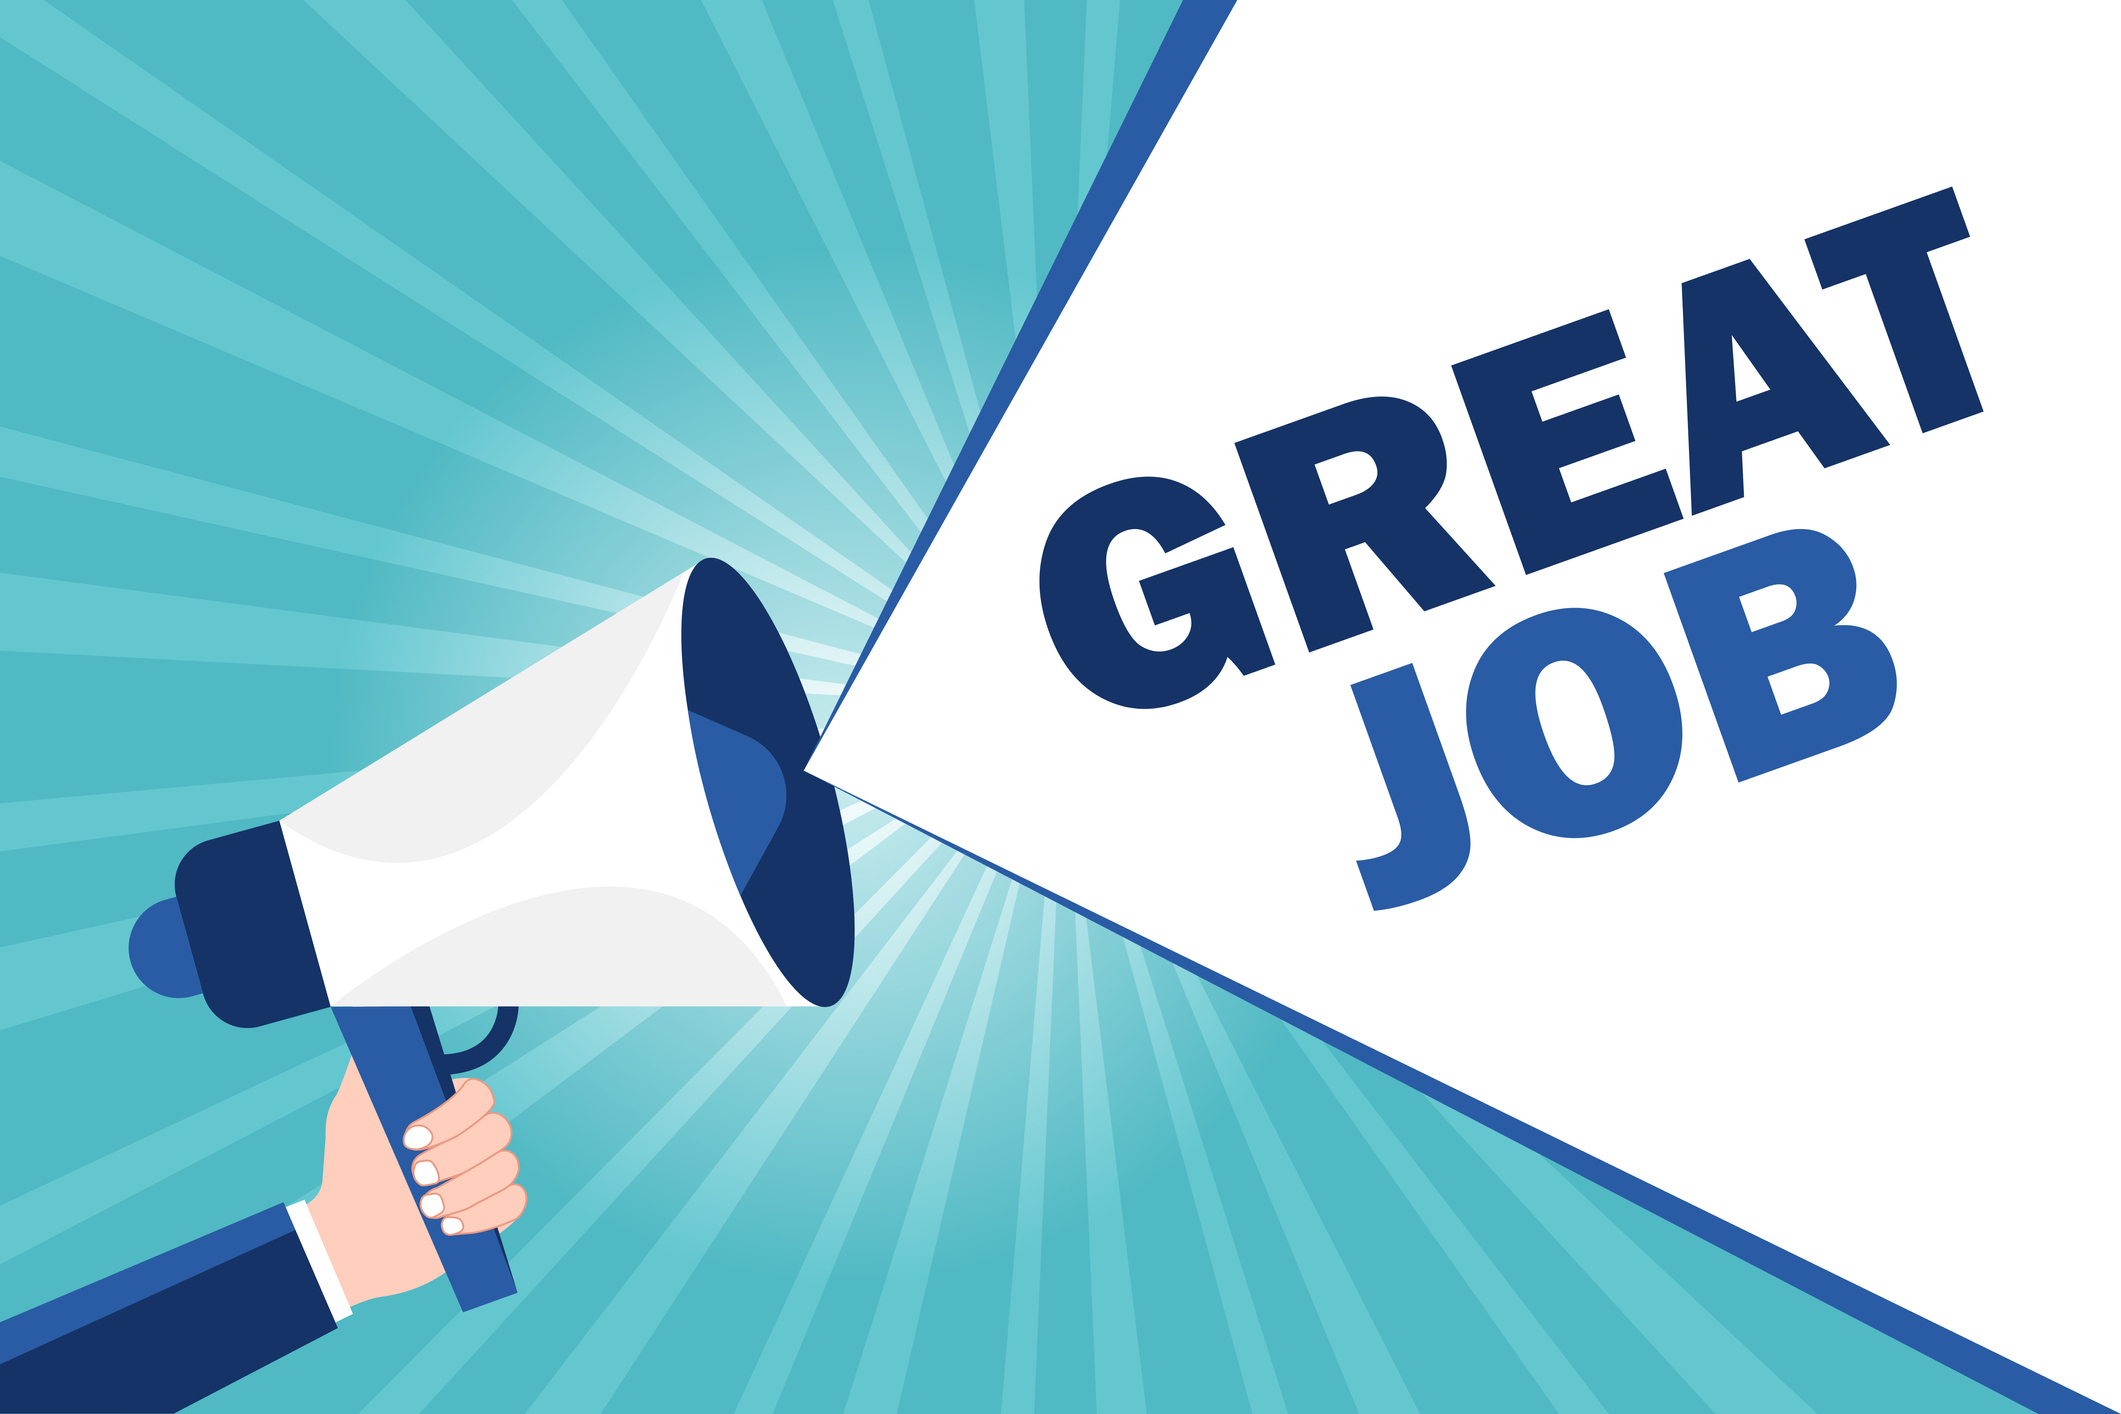 Image of megaphone with words "Great Job!"